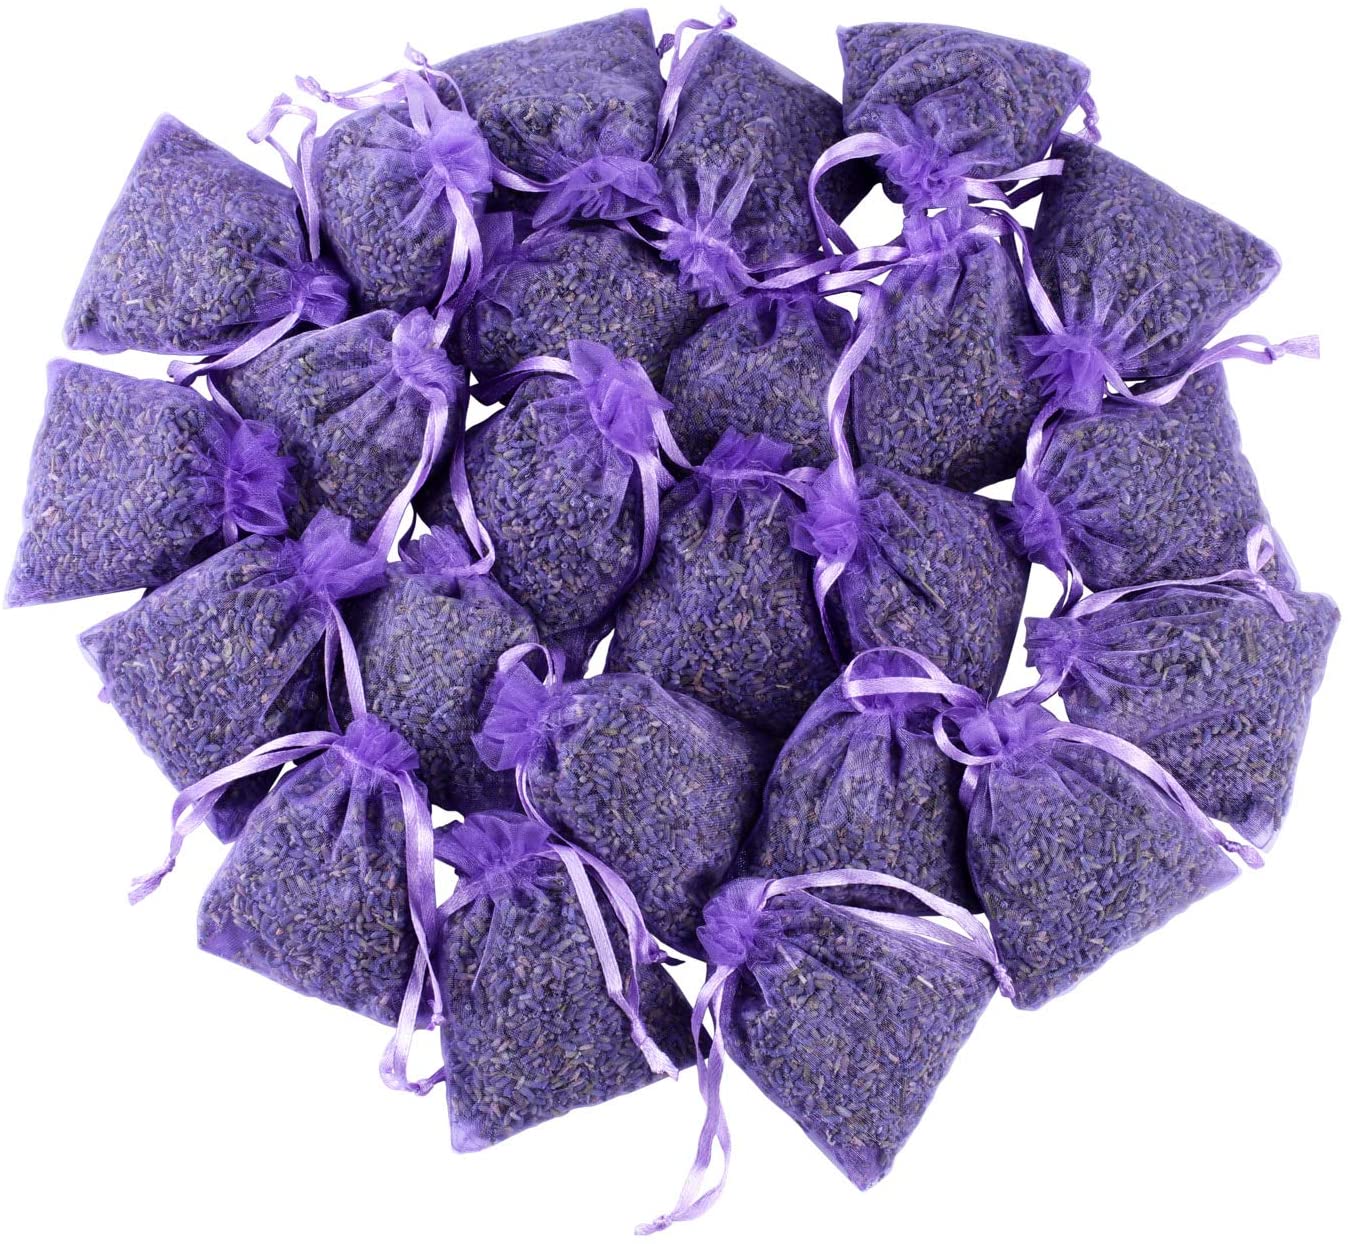 French Lavender Sachets for Drawers and Closets Fresh Scents, Home Fragrance Sachet, Pack of 24, Purple - image 1 of 4